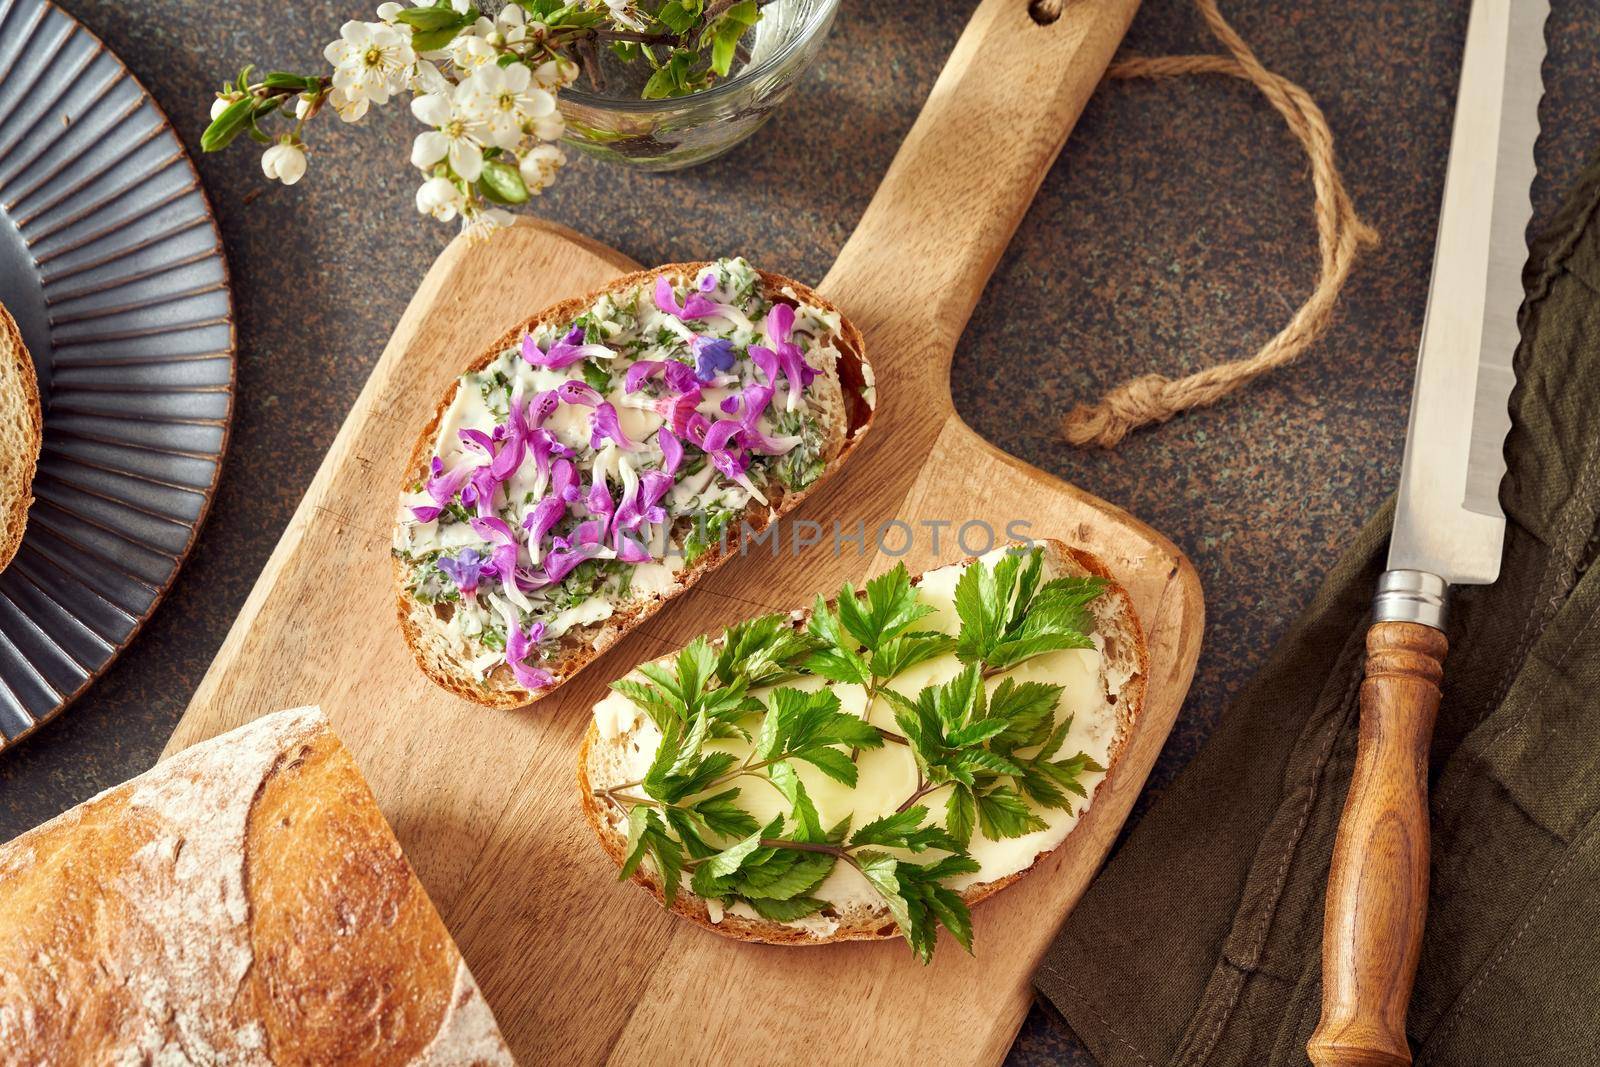 Sourdough bread with wild edible spring plants - young leaves of ground elder, blossoms of purple dead-nettle and lungwort